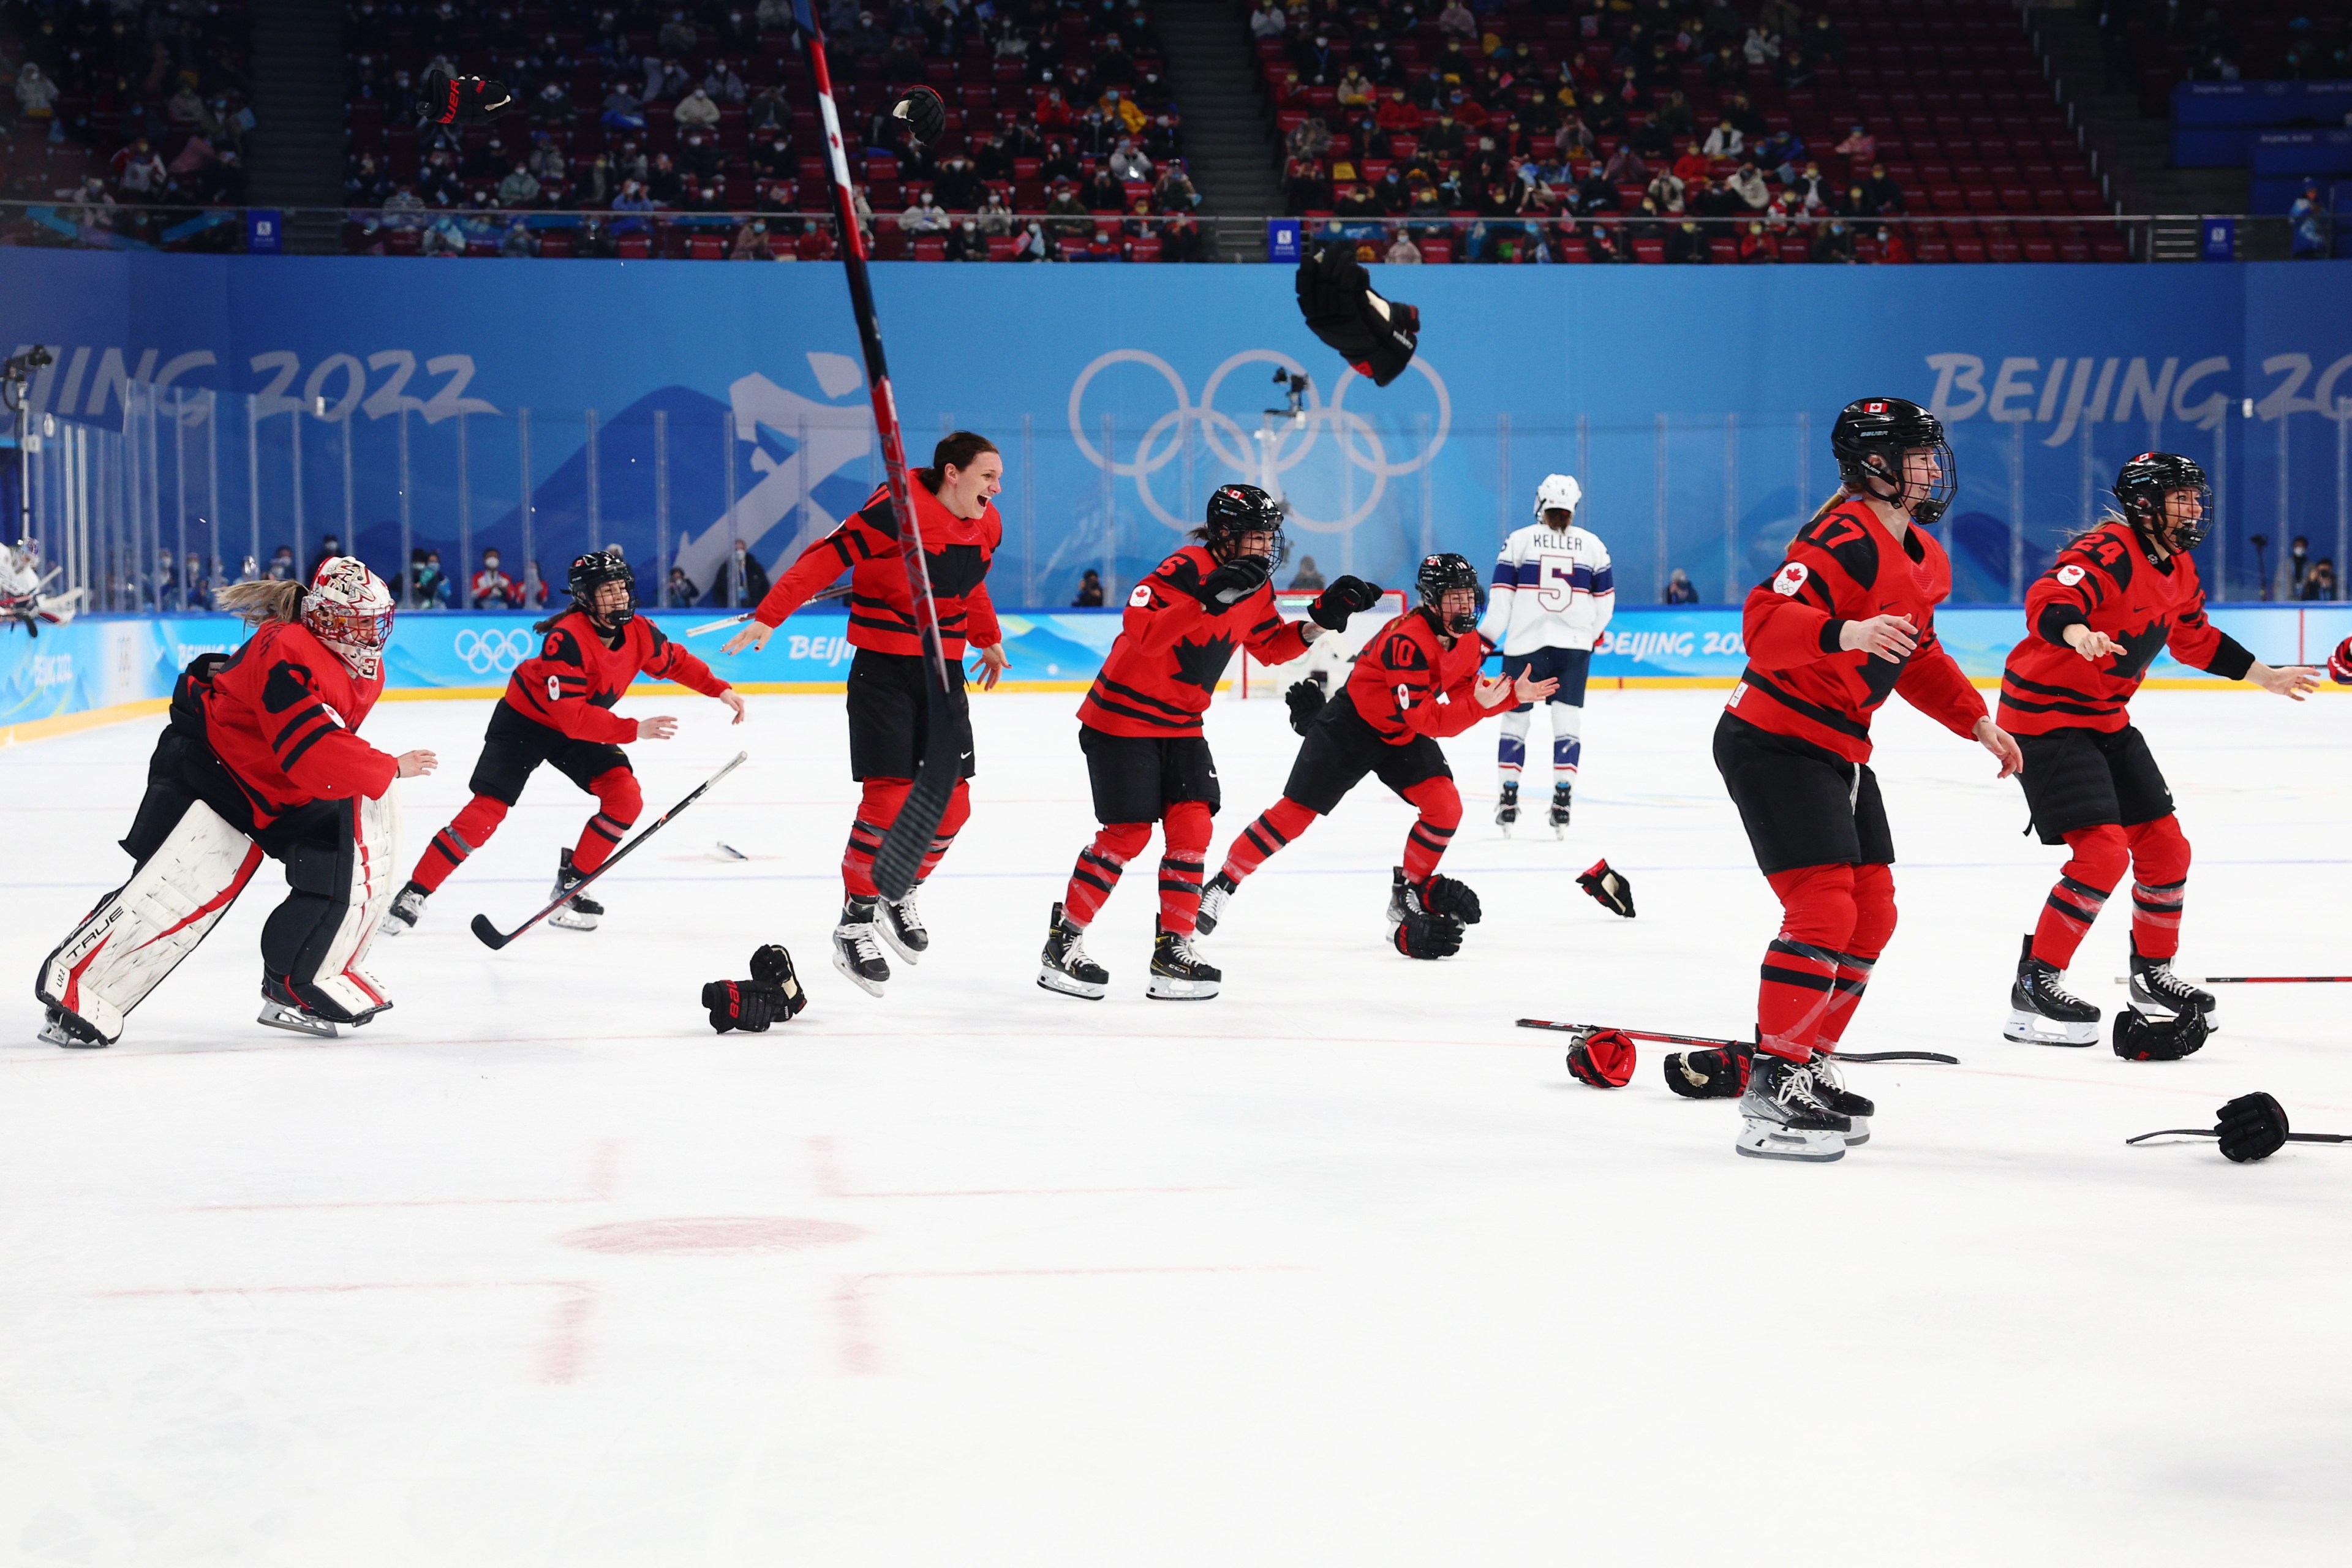 Team Canada reacts after defeating Team United States in the Women's Ice Hockey Gold Medal match between Team Canada and Team United States on Day 13 of the Beijing 2022 Winter Olympic Games at Wukesong Sports Centre on February 17, 2022 in Beijing, China.